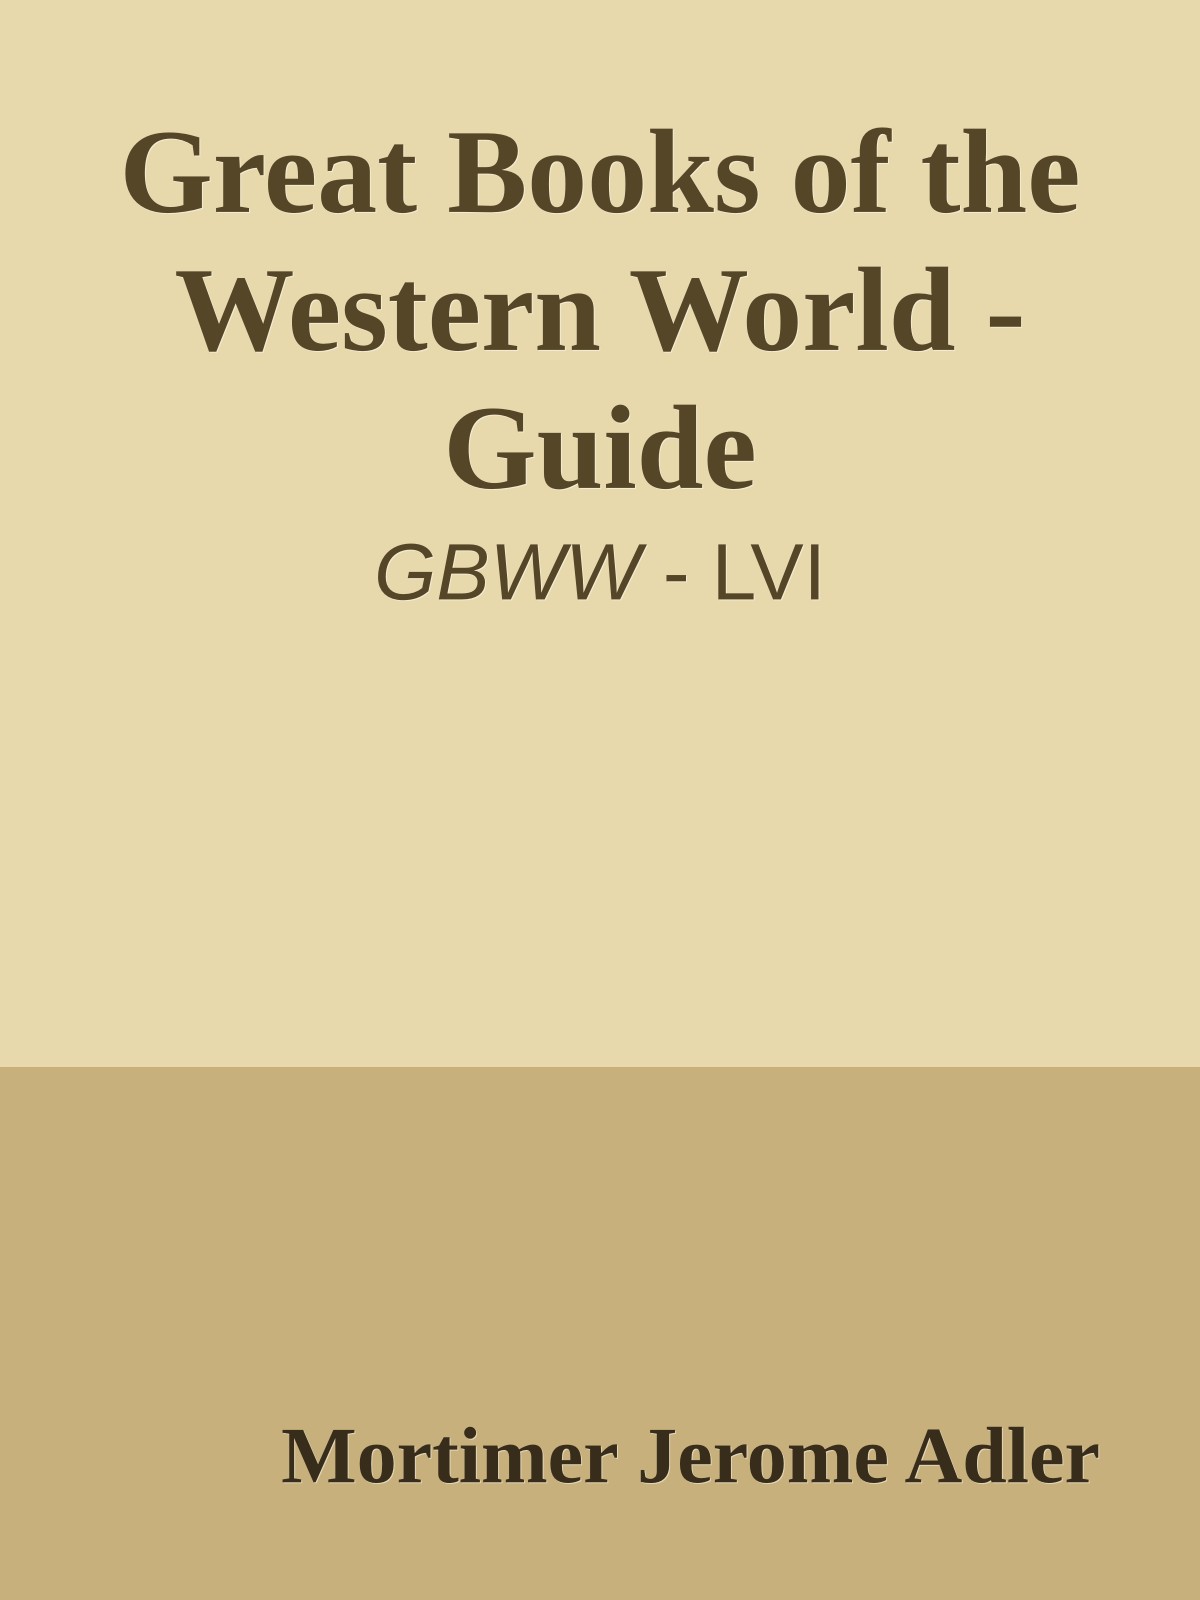 Great Books of the Western World - Guide